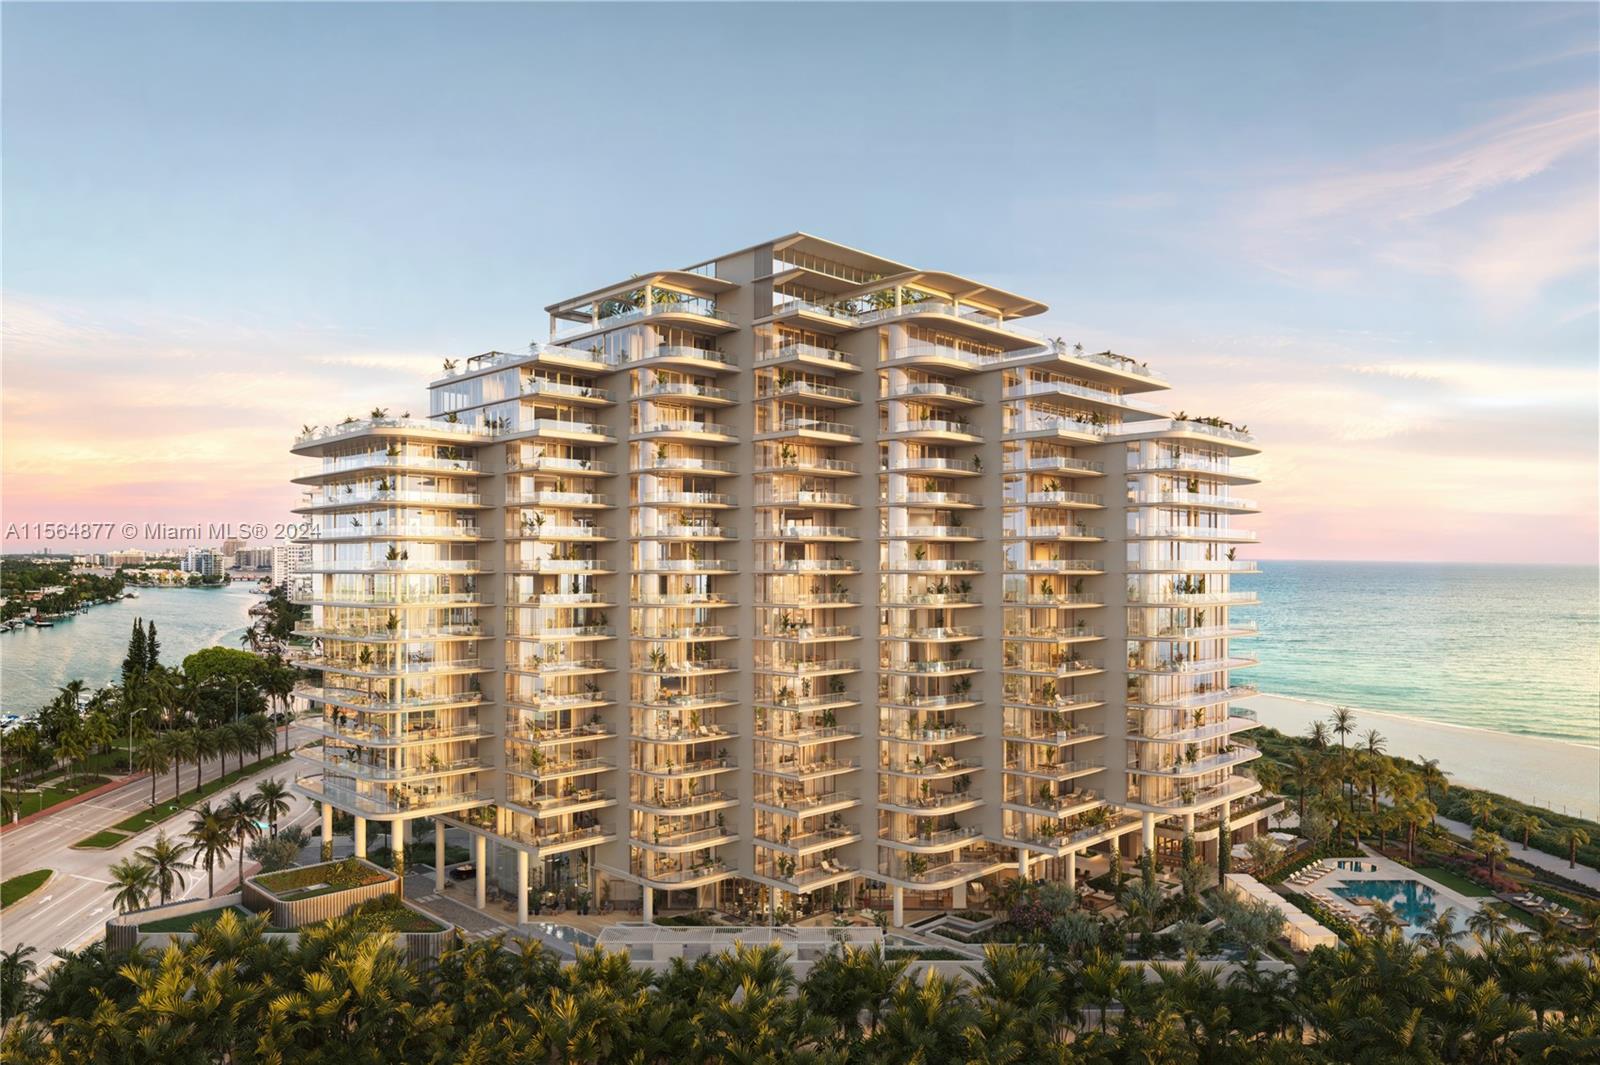 Rising from the most peaceful and expansive stretch of sand on Miami Beach’s coastline, The Perigon is an unprecedented collaboration between three global design icons. The rare seclusion, matchless amenities, and impeccable service of this unique private enclave promises residents an exclusive Miami Beach lifestyle.This PH 4 bedroom residence with over 5685SF of living space and 6487SF of terraces makes this one of the best PH options on the market. Buyer chooses - Kitchen cabinets, flooring options, closets installed - Developer inventory is subject to change based on activity of sales. Gas cooking, Wolf & SubZero appliance, stone countertops Parking is self park or valet park (owners choice) - Contact the Sales Gallery to learn more about the finest new building in Miami Beach.